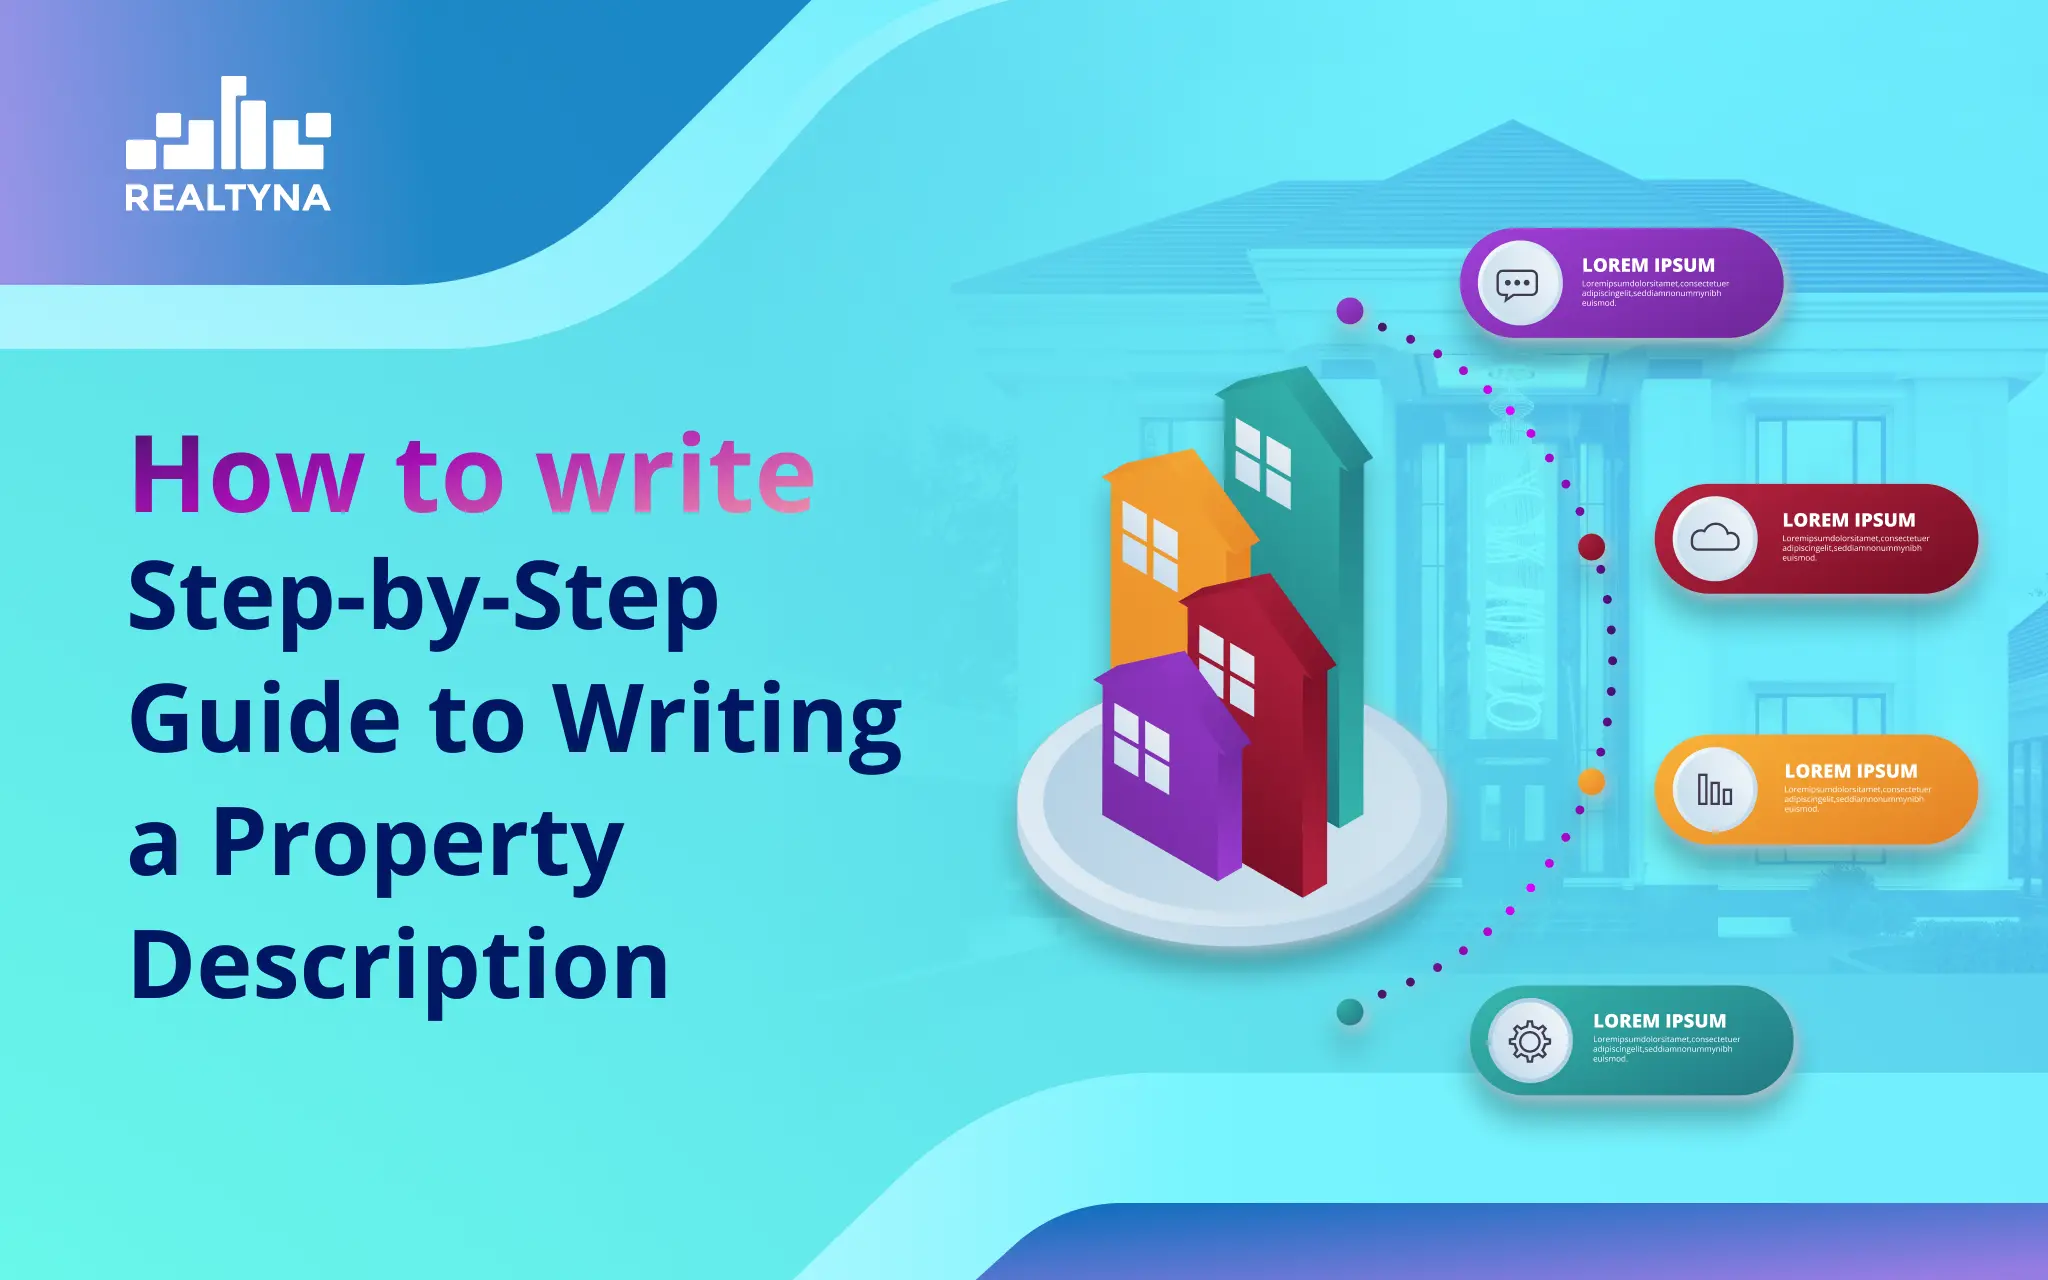 Step-by-Step Guide to Writing a Property Description